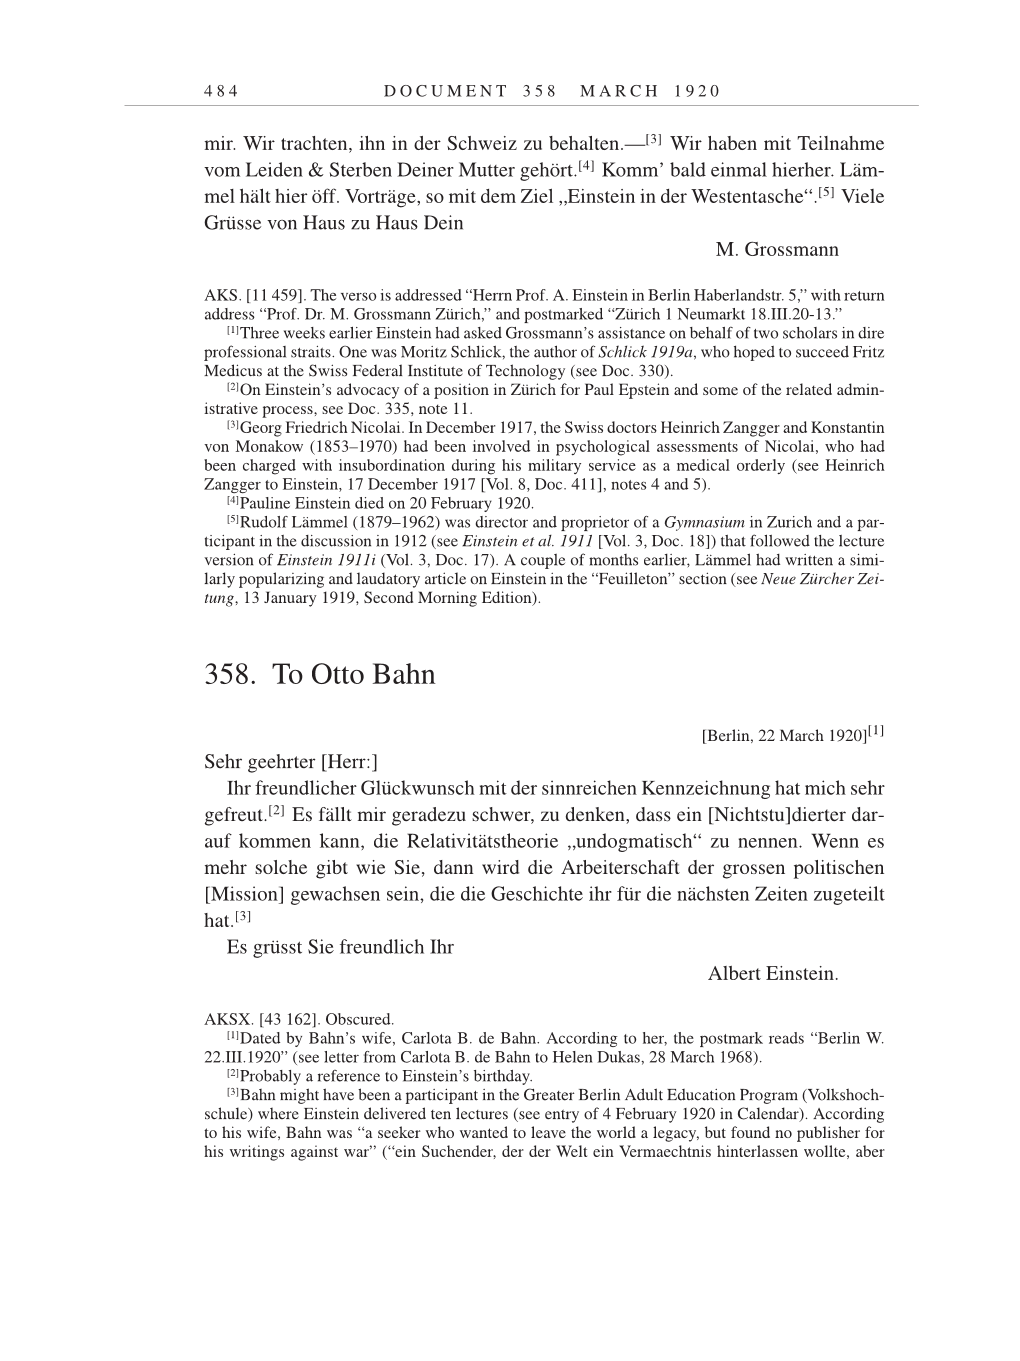 Volume 9: The Berlin Years: Correspondence January 1919-April 1920 page 484